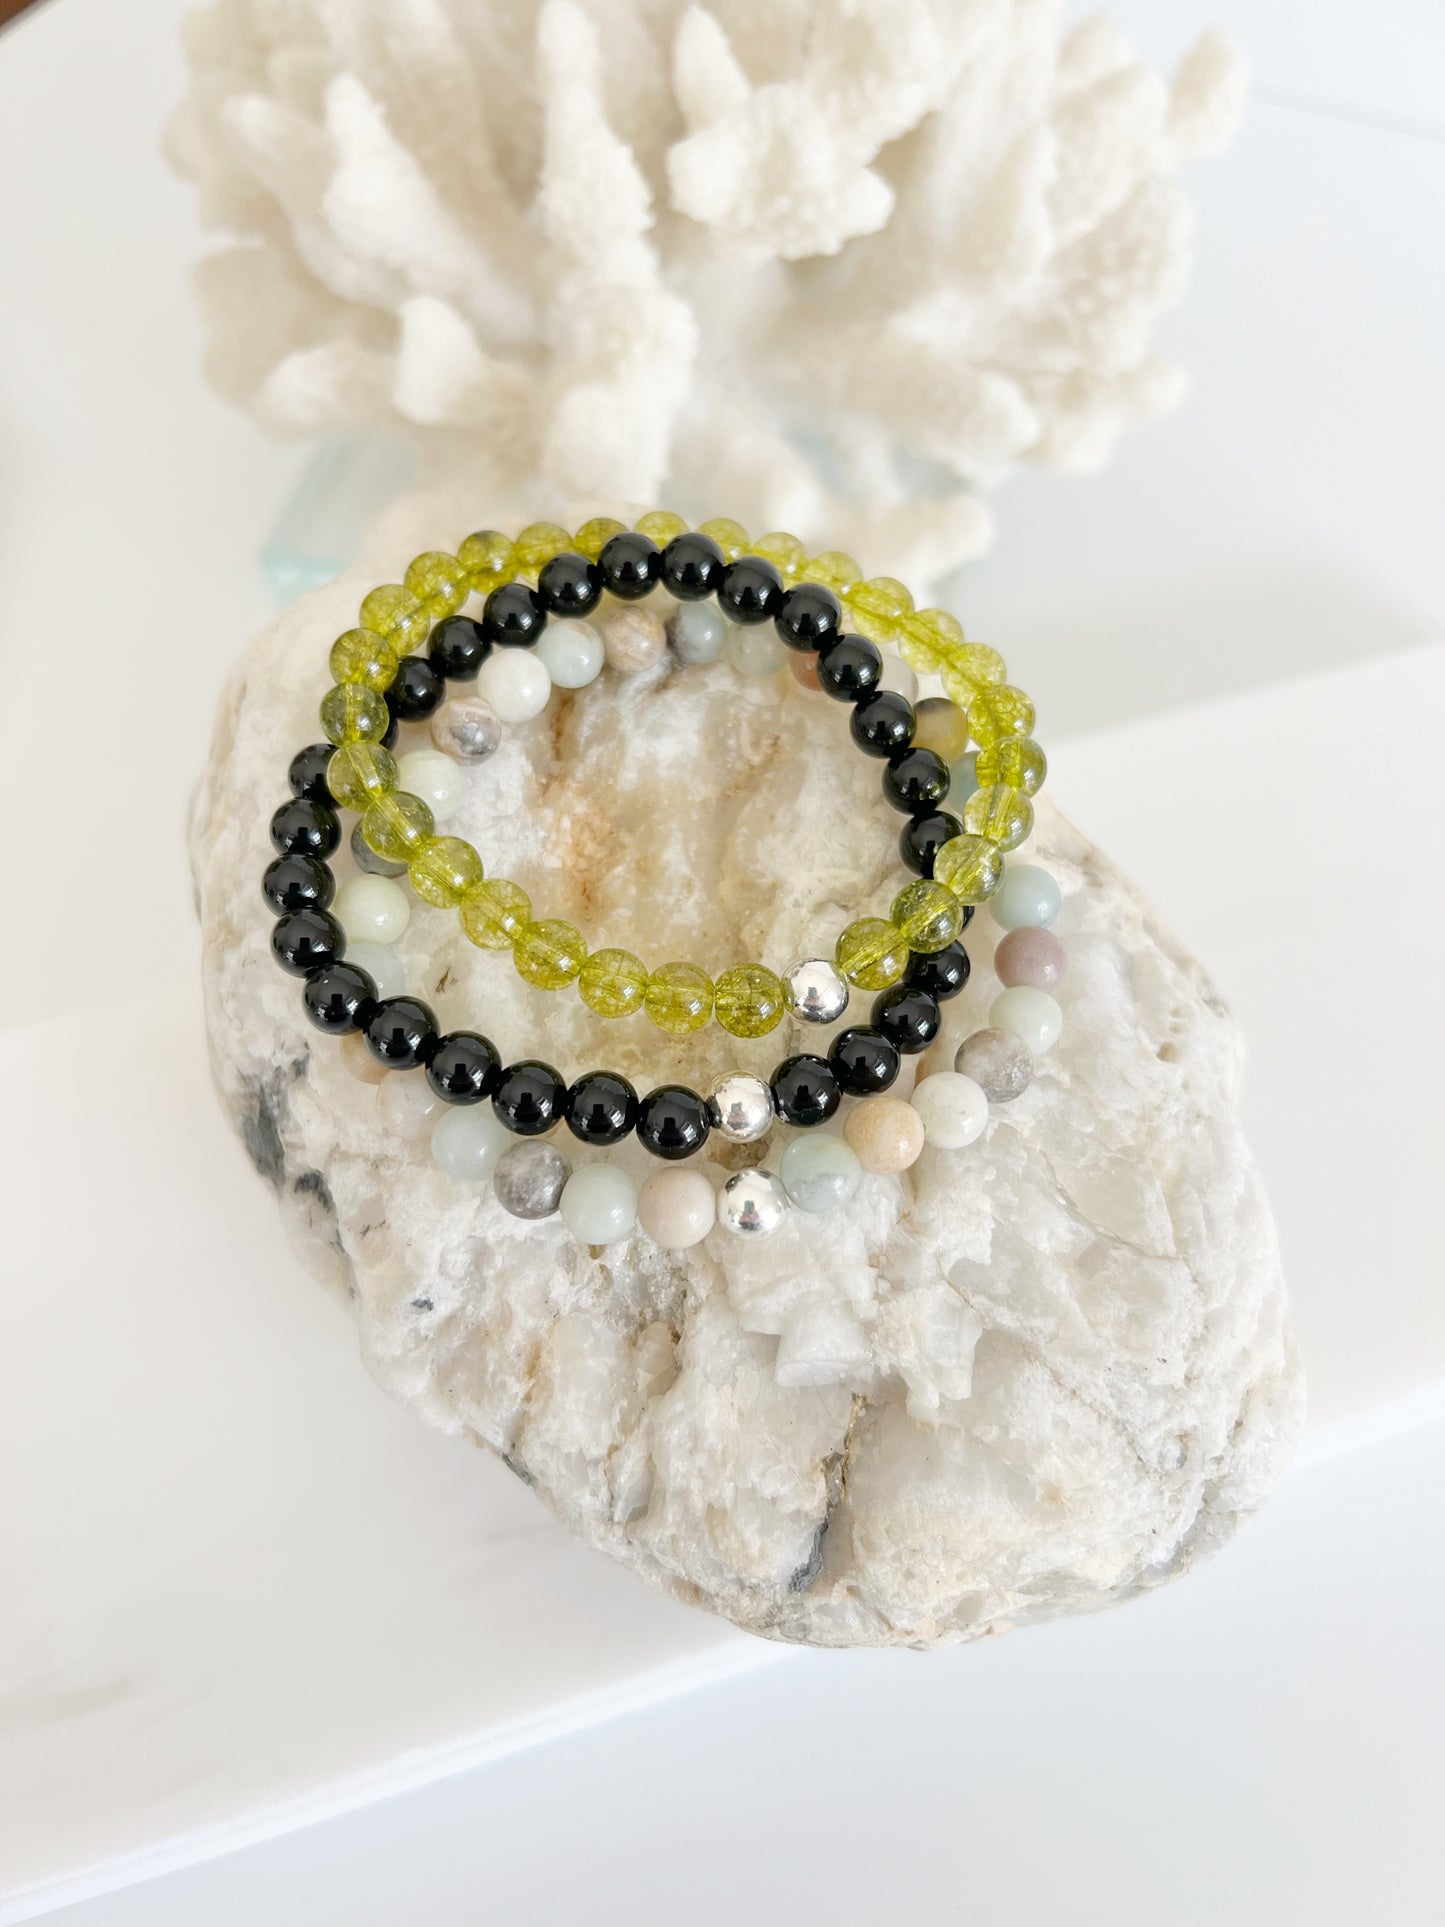 three stretch bracelets stacked on top of each other on a light brown rock white coral behind it.  One transluscent green one, a multi colored one with light blue, yellow, black and white and a black one. All have one silver bead.